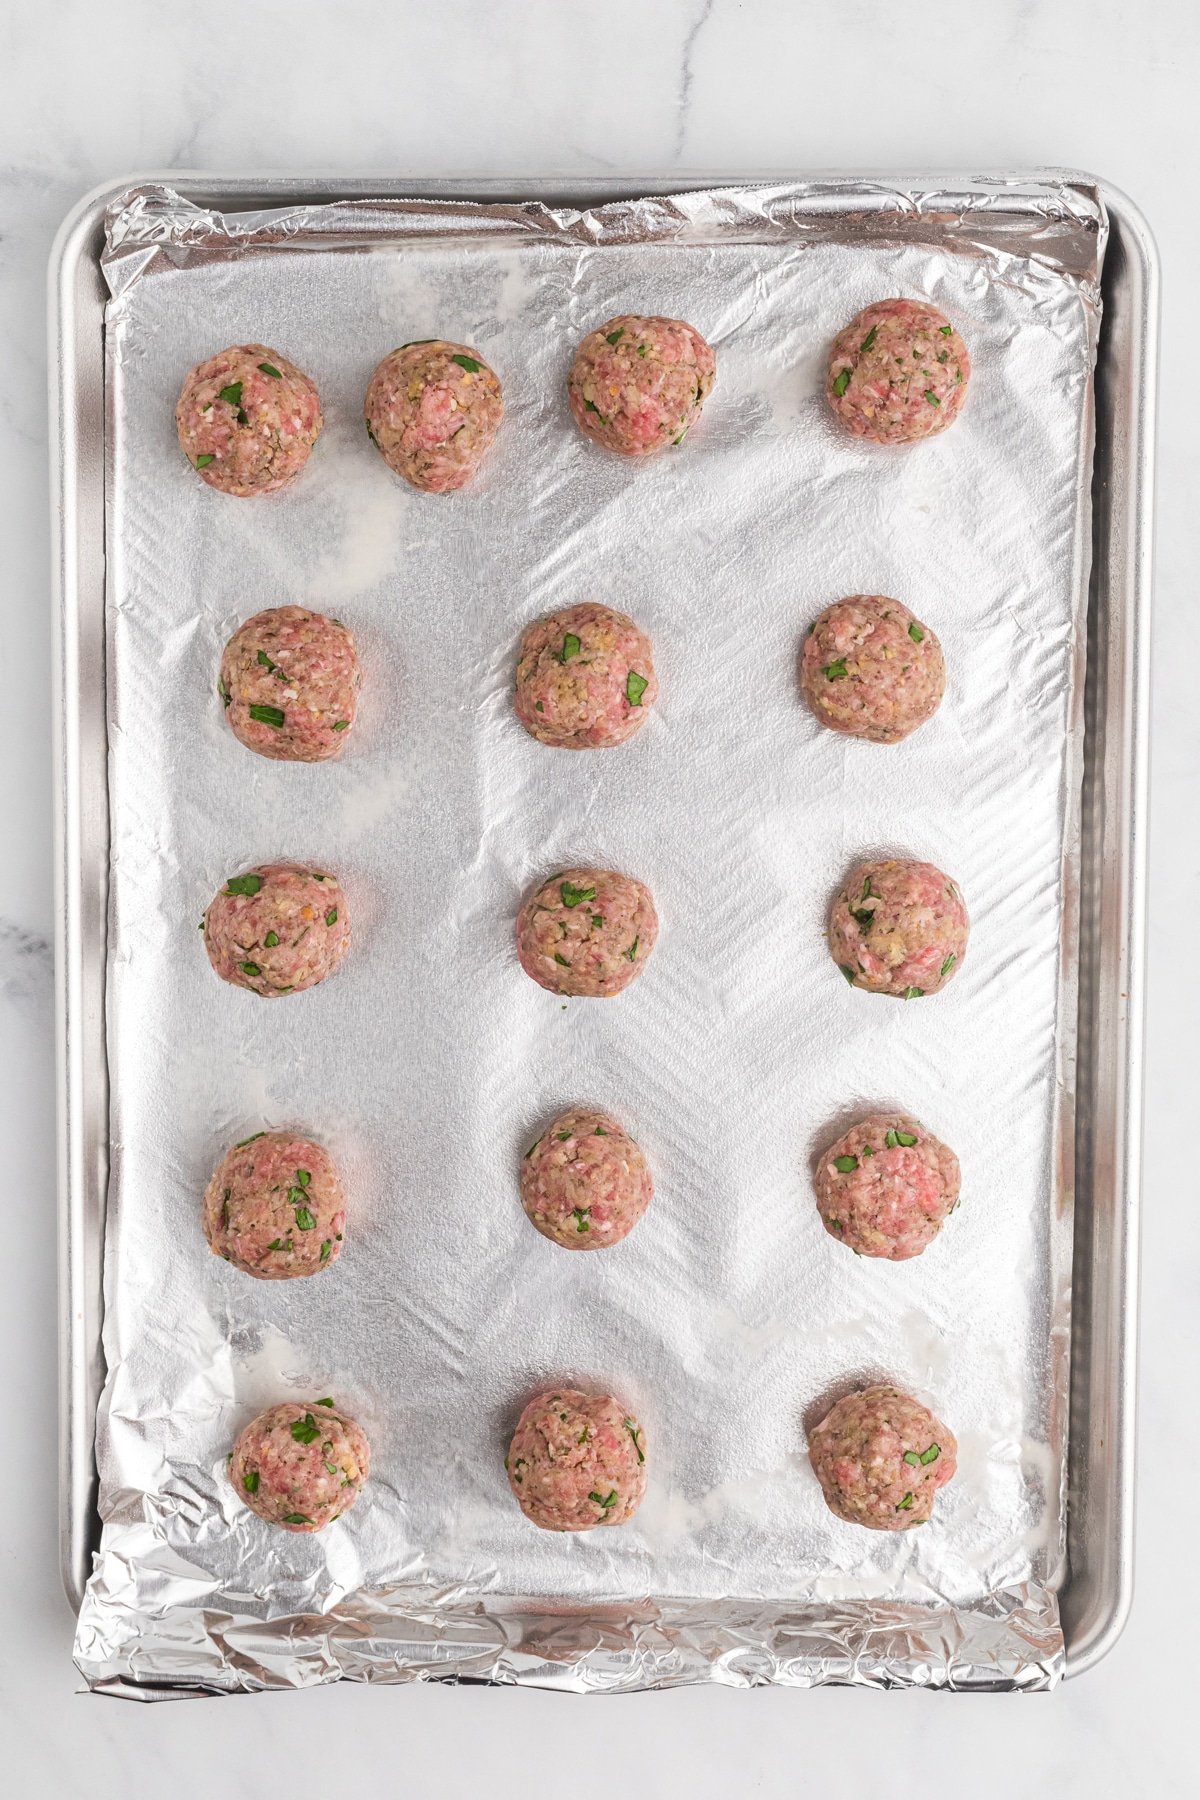 Meatballs ready to be baked on a baking sheet